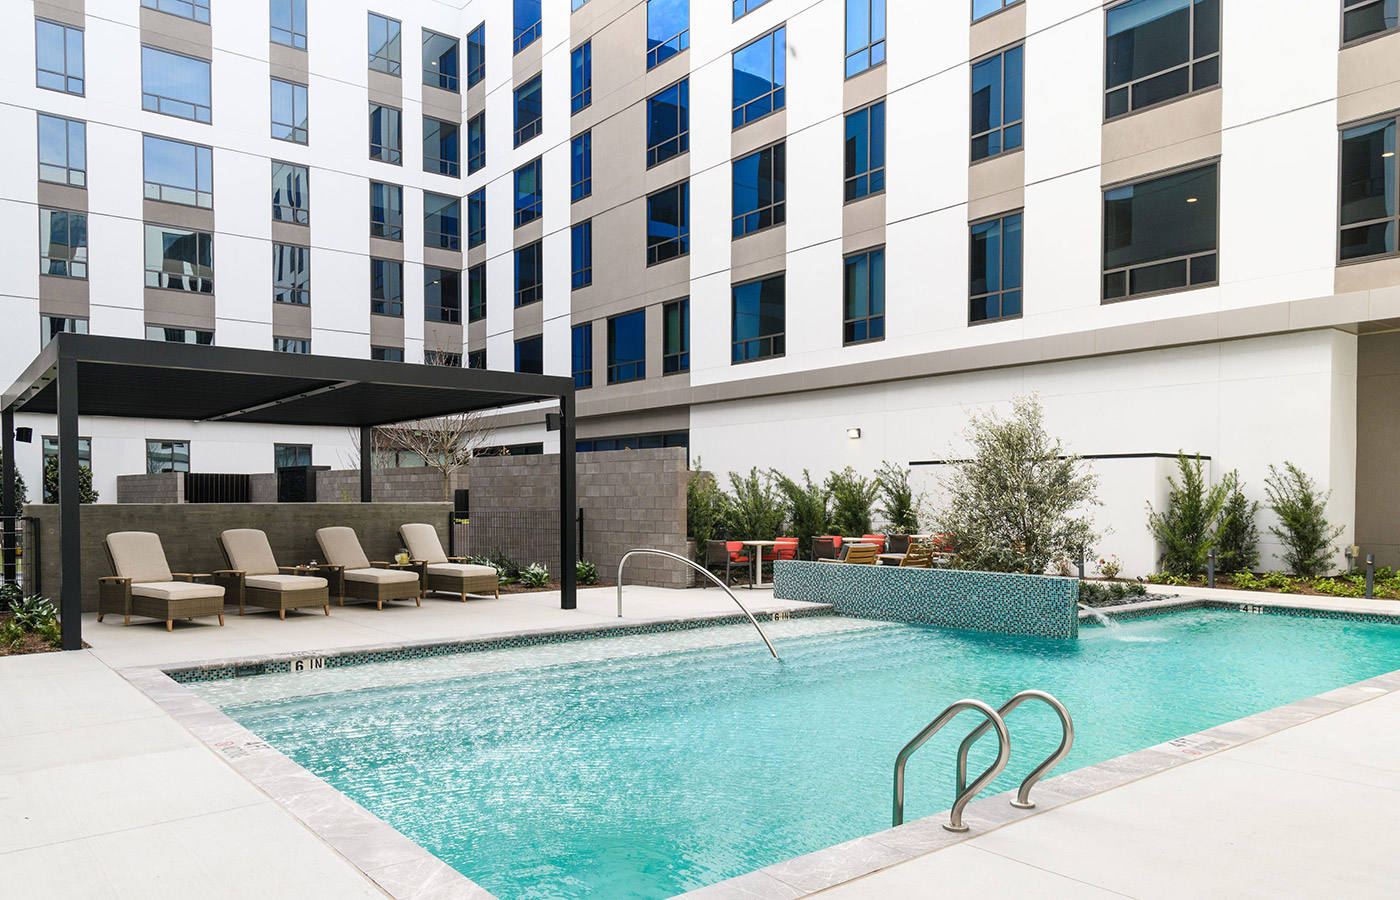 An outdoor pool area at The Watermark at Houston Heights.